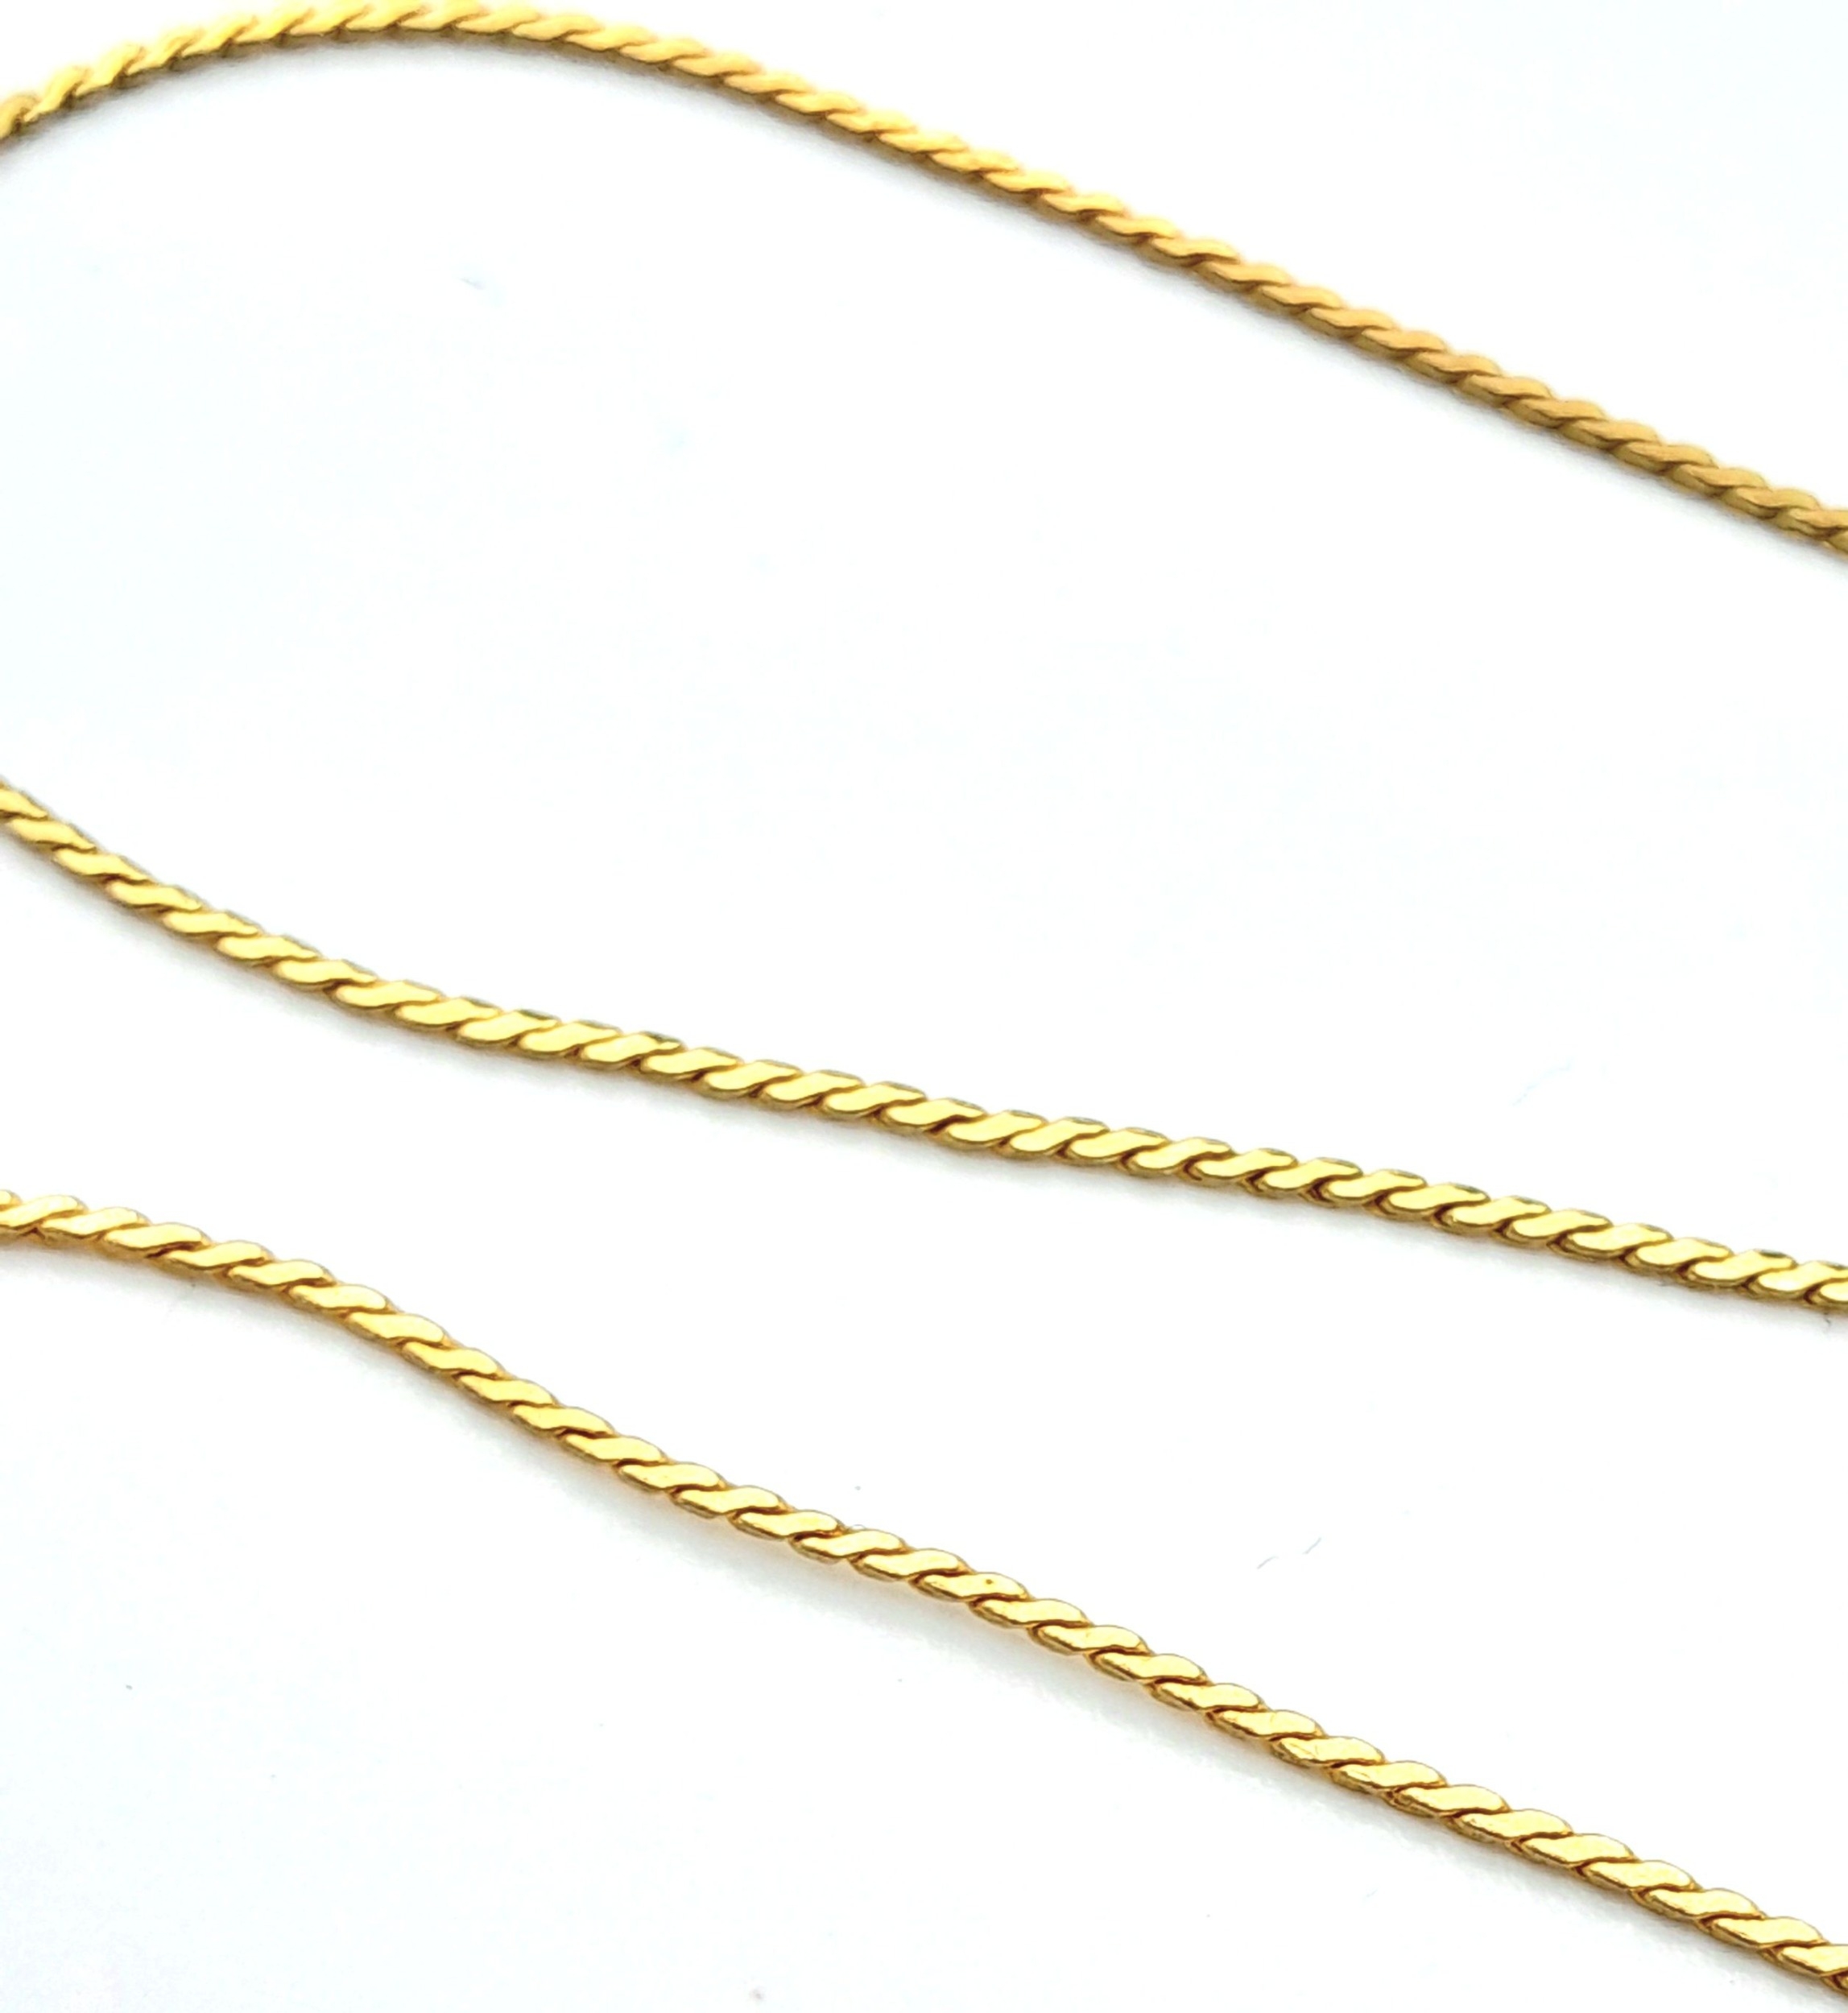 A 9 k yellow gold chain necklace, length: 37 cm, weight: 2.3 g. - Image 3 of 4